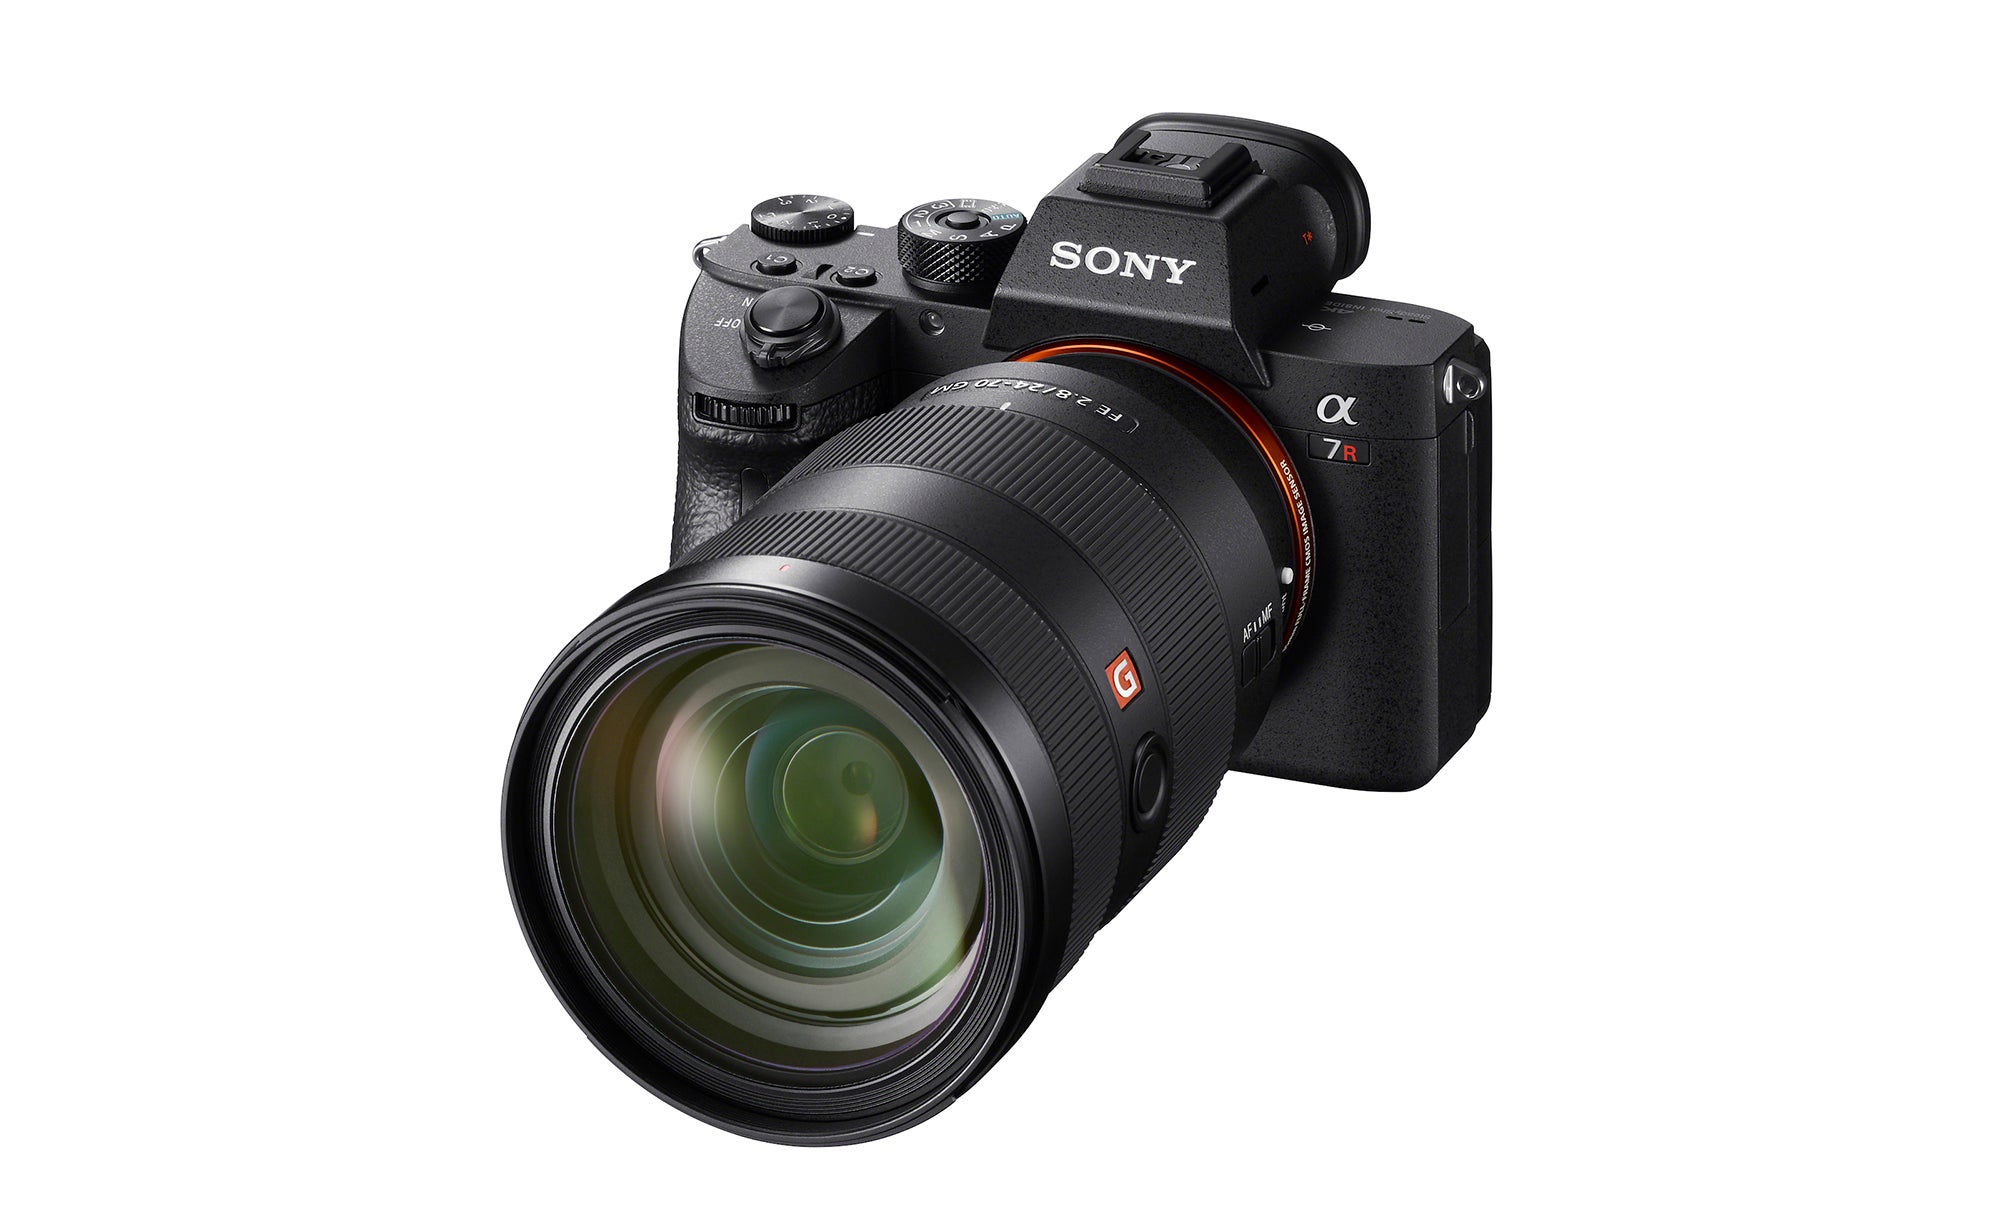 Sony's Alpha 7 IV goes beyond 'Basic' with Outstanding Photo and Video  Features